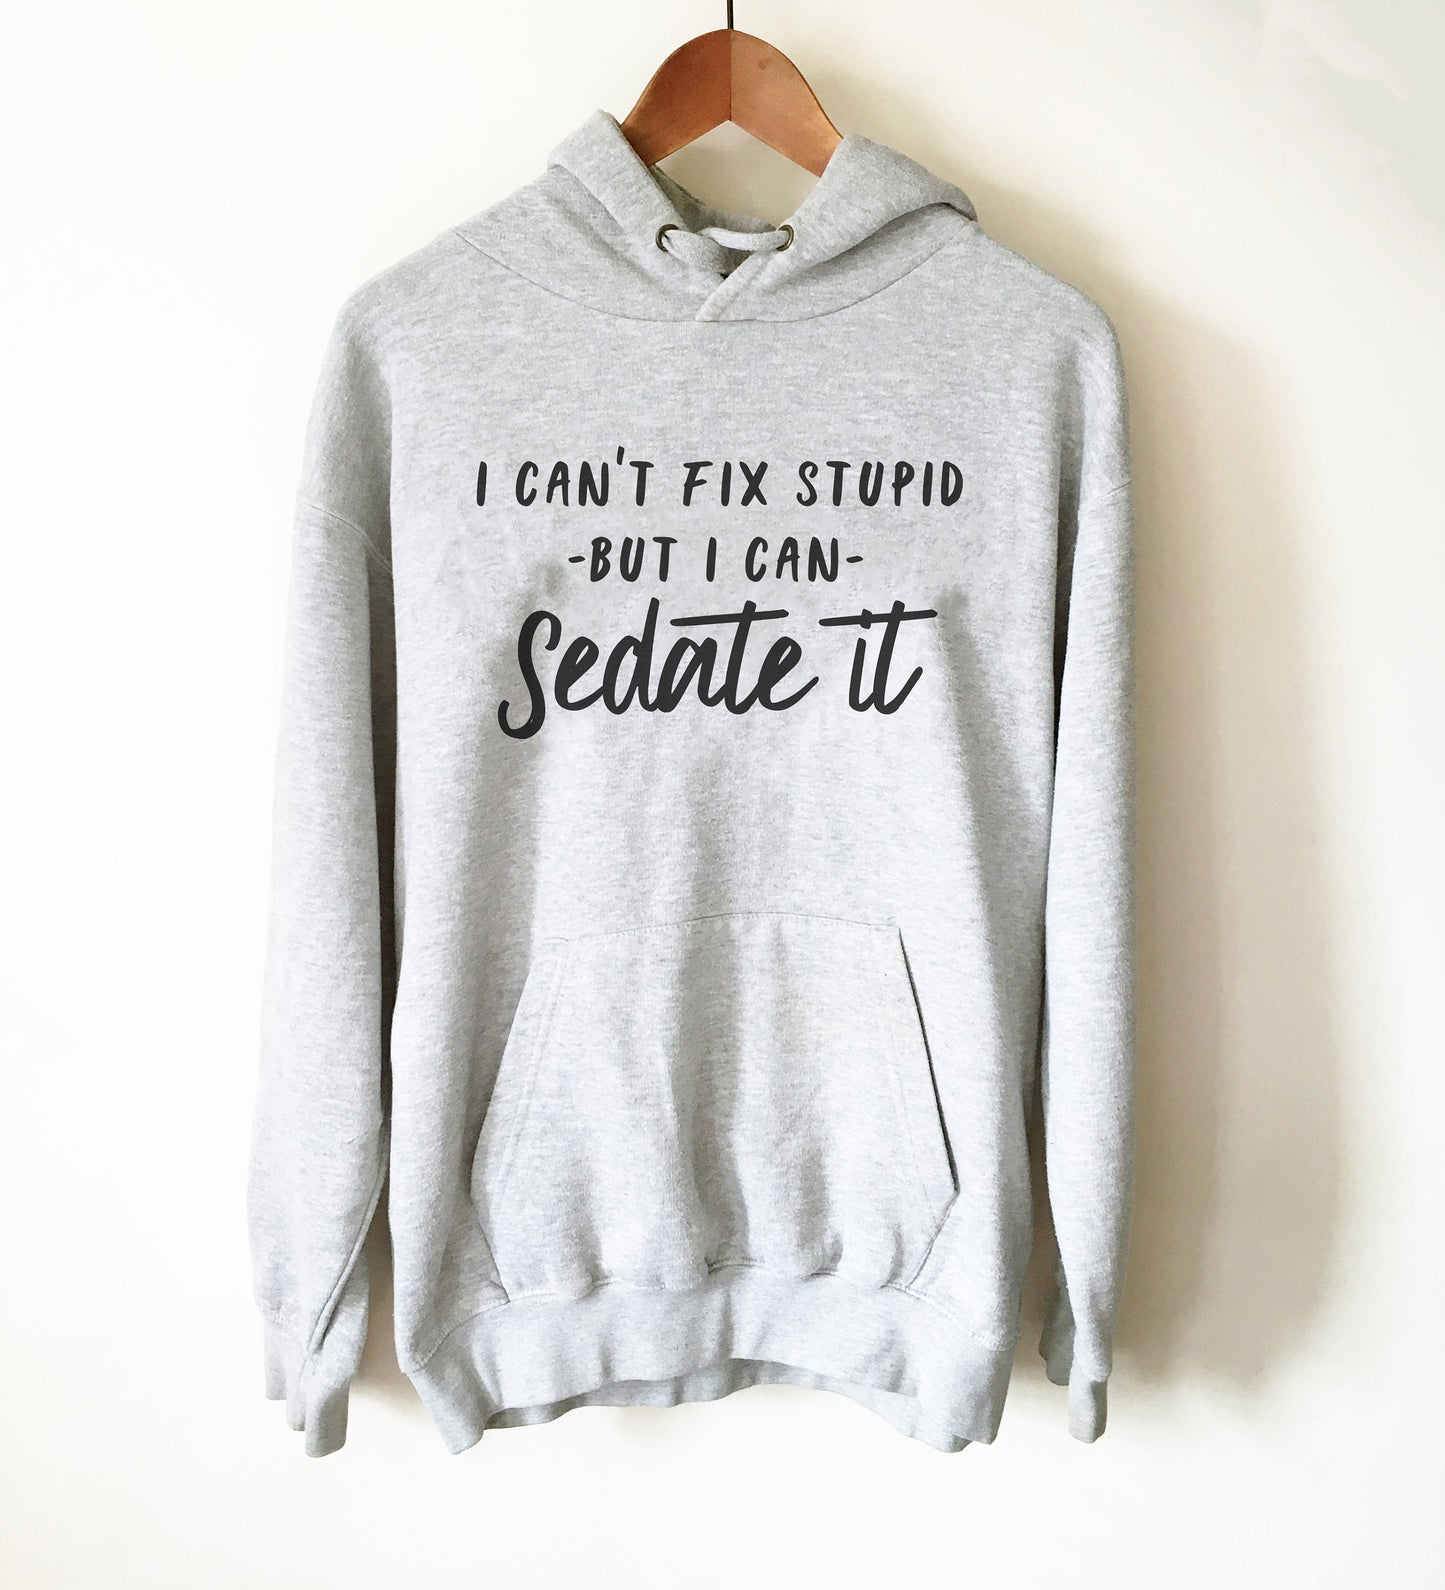 I Can't Fix Stupid But I Can Sedate It Hoodie - Anesthesiologist Shirt, Medical Student Gift, Nursing Student, Doctor Shirt, Surgeon Gift